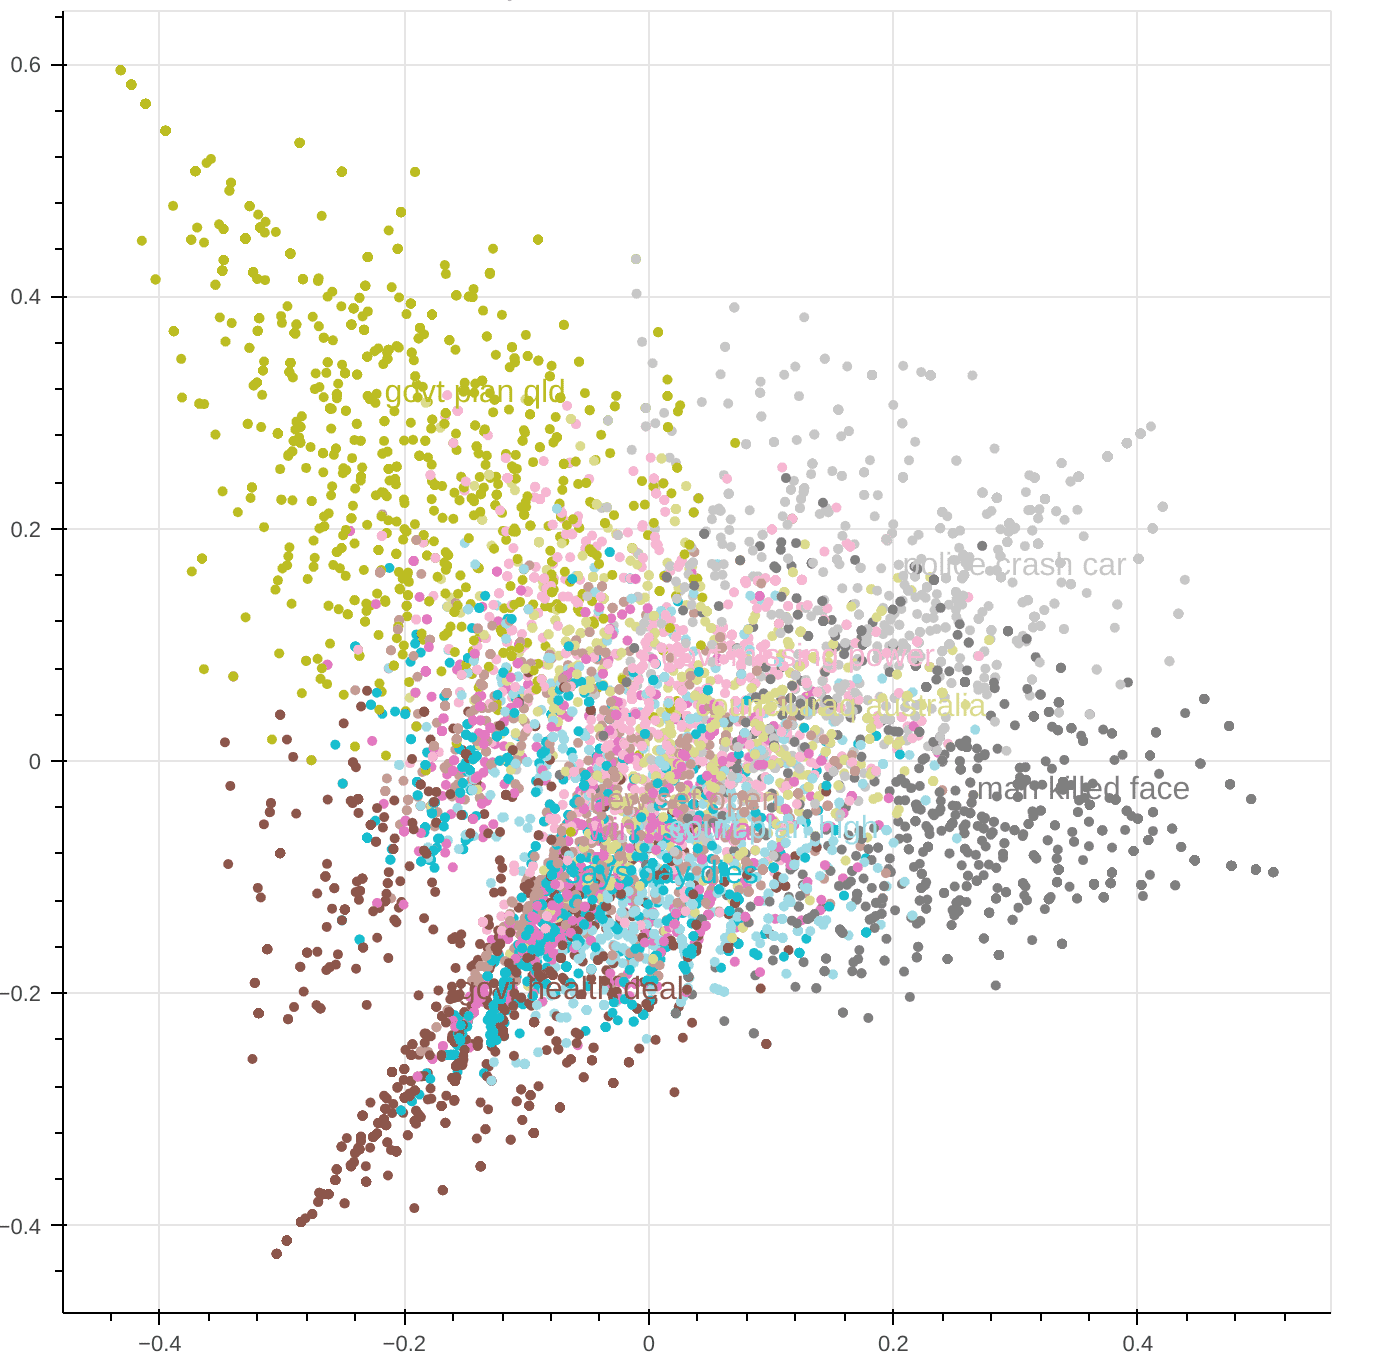 Visualizing 10 topic clusters after applying PCA algorithm on the output of LDA algorithm